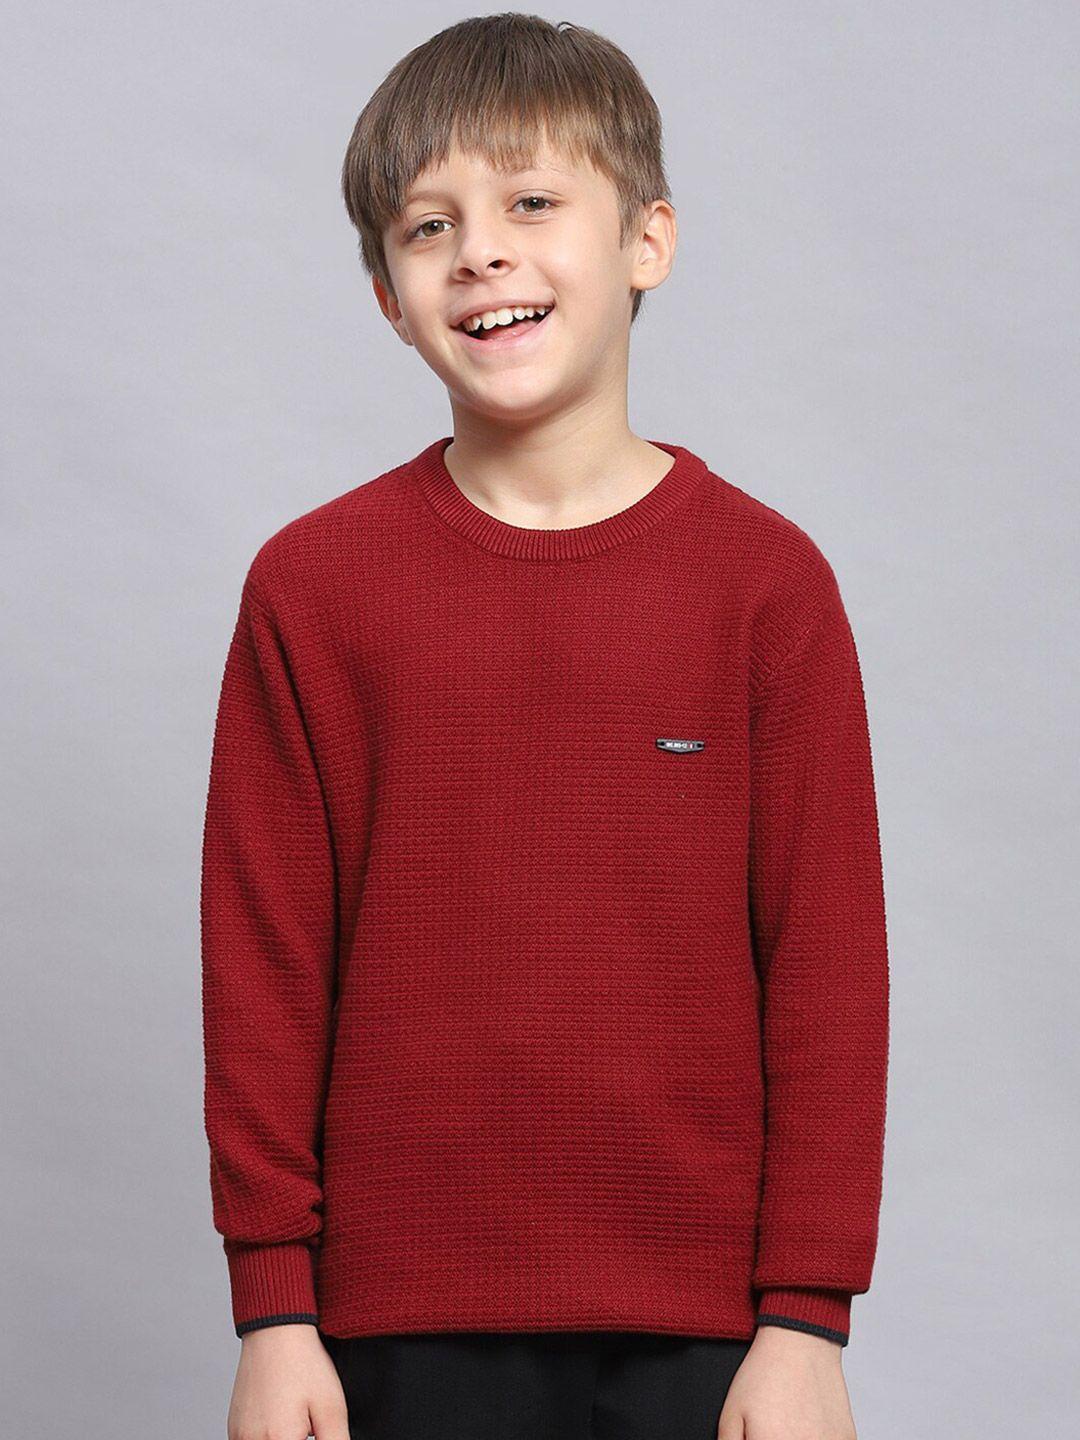 monte carlo boys long sleeves pure cotton pullover